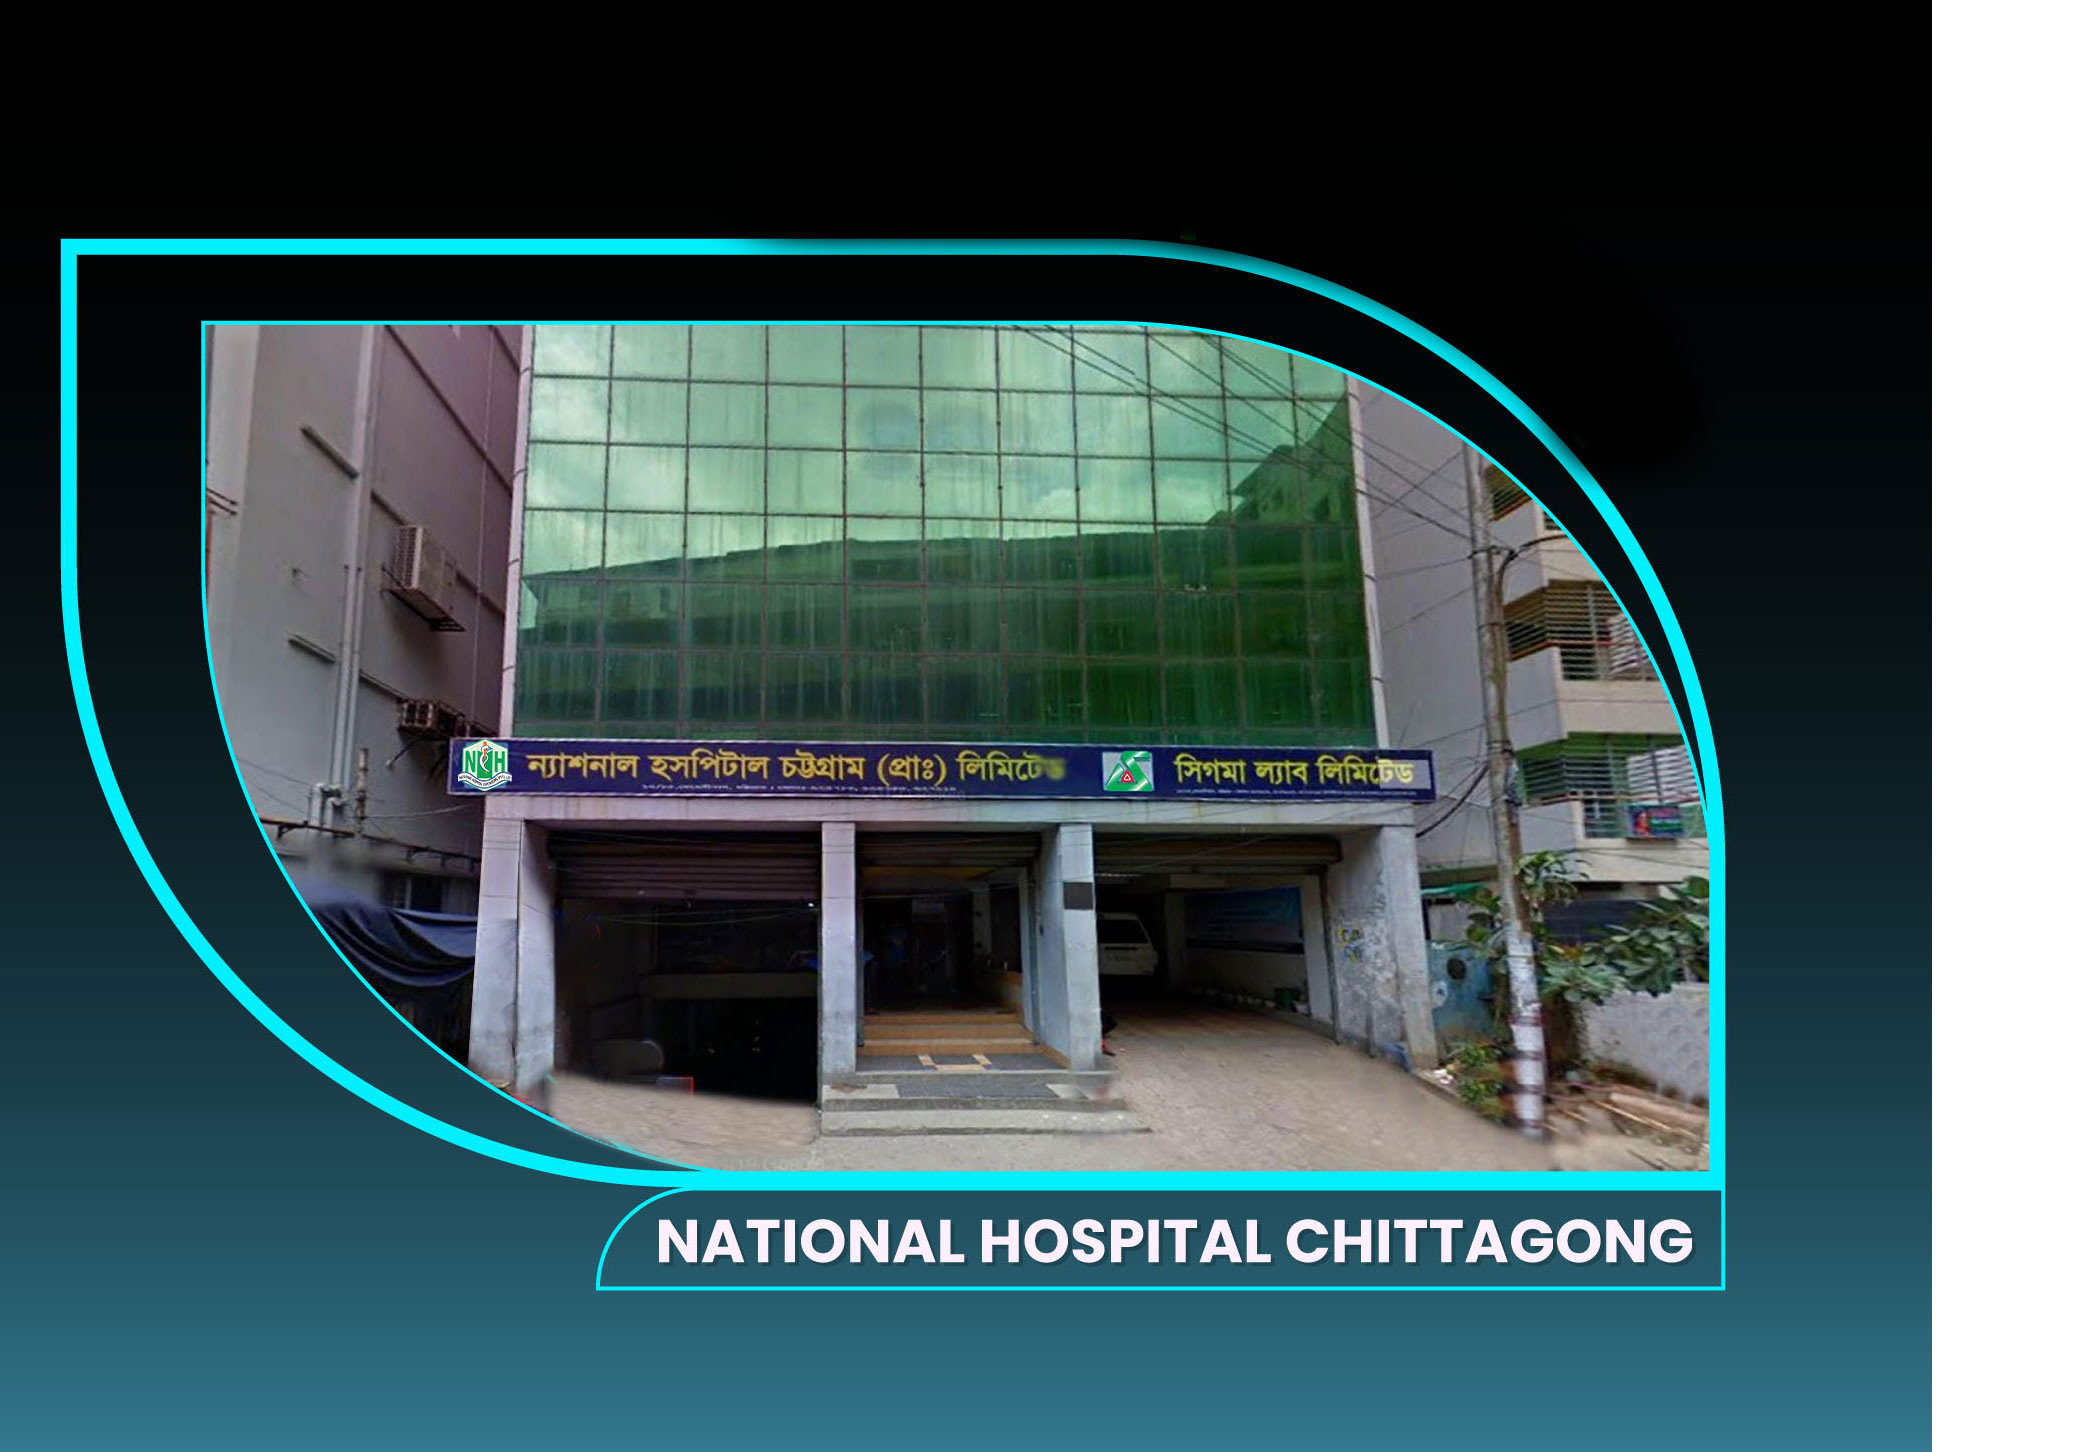 National Hospital is  the No 1 hospital private hospital in Bangladesh